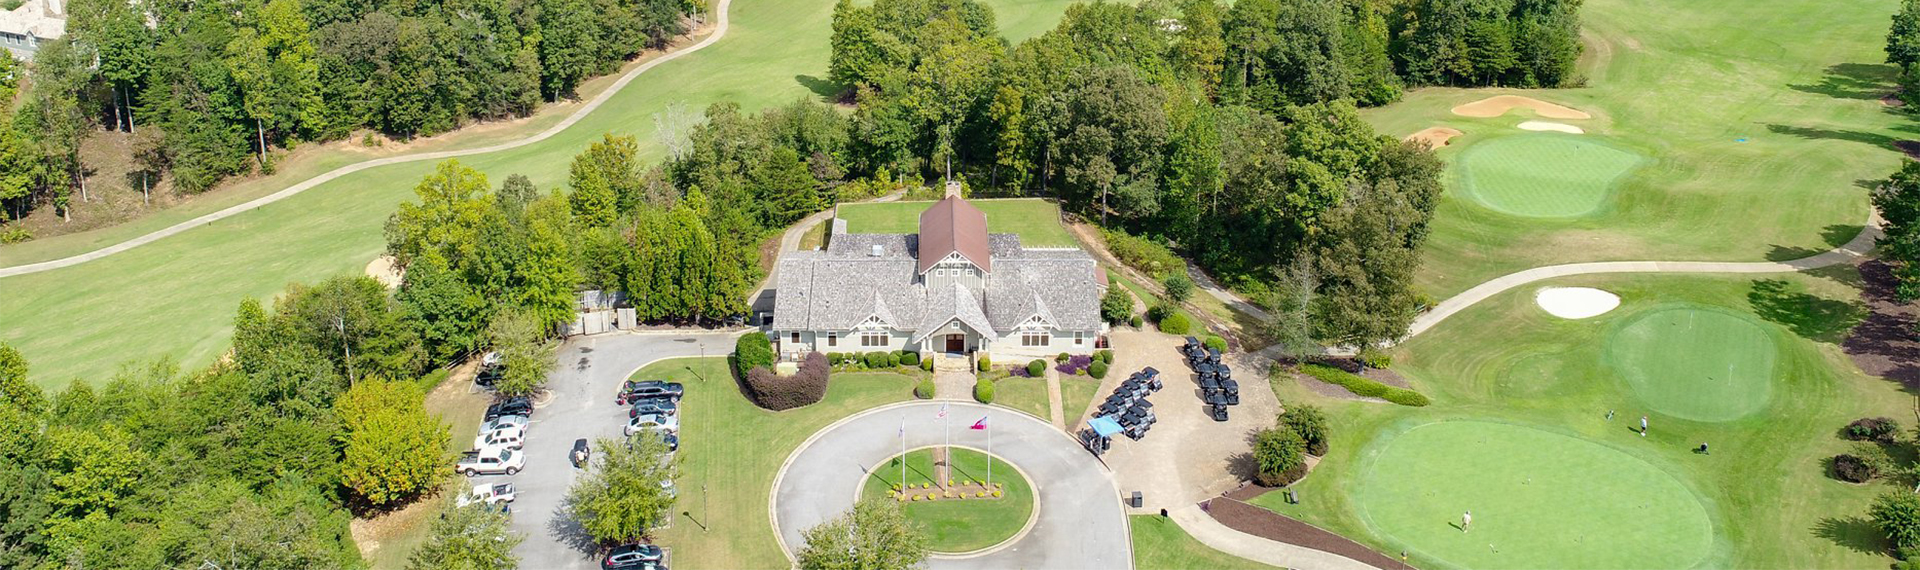 aerial view of golf club house